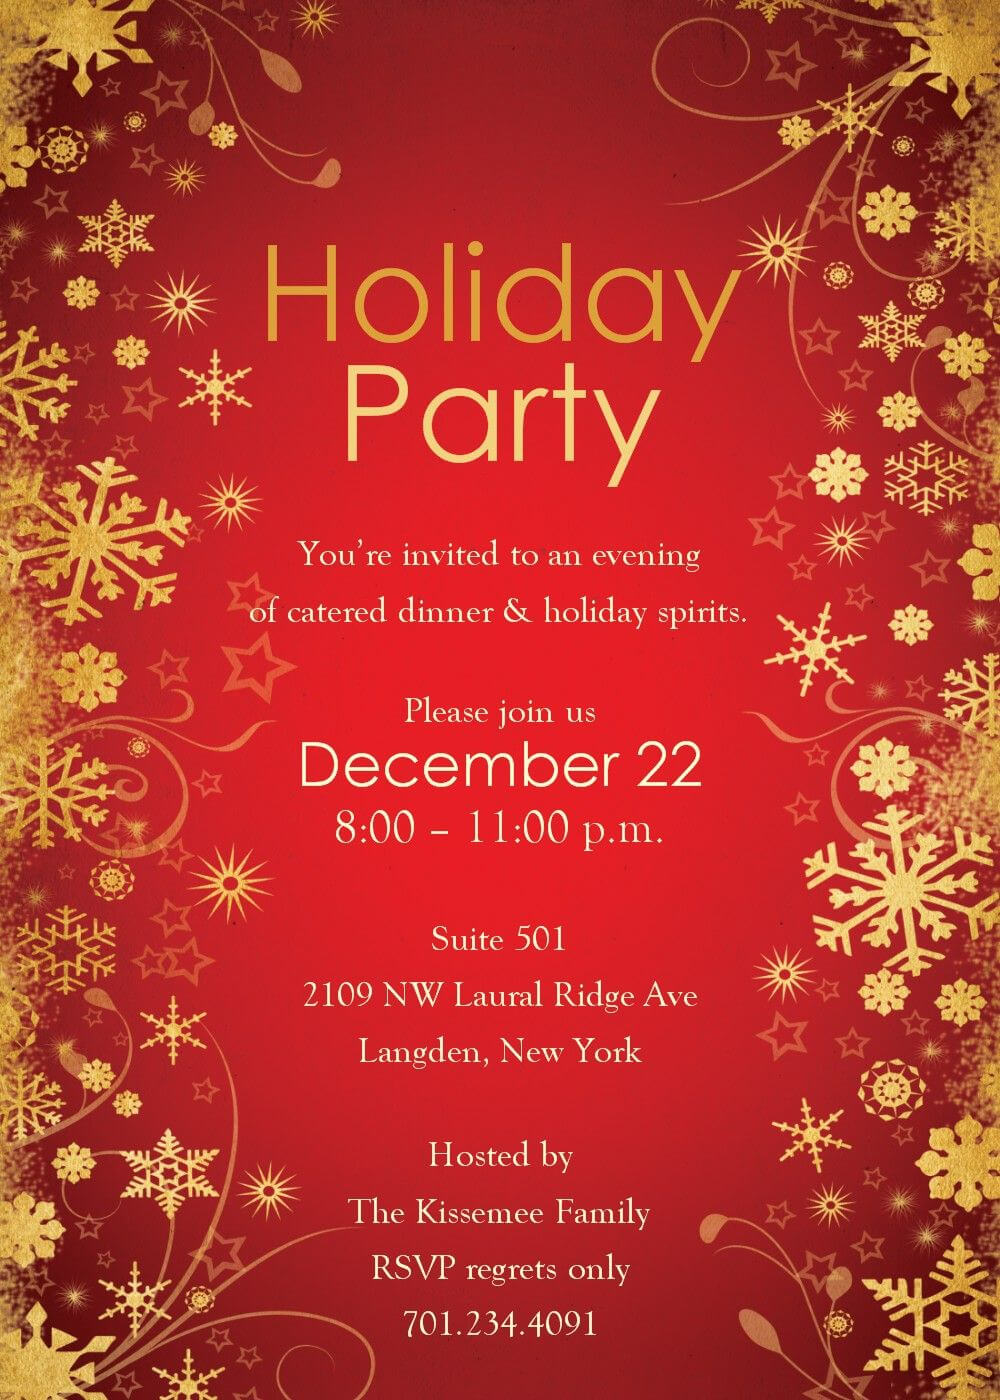 Christmas Party Invitations Templates Word | Christmas Party With Regard To Free Christmas Invitation Templates For Word